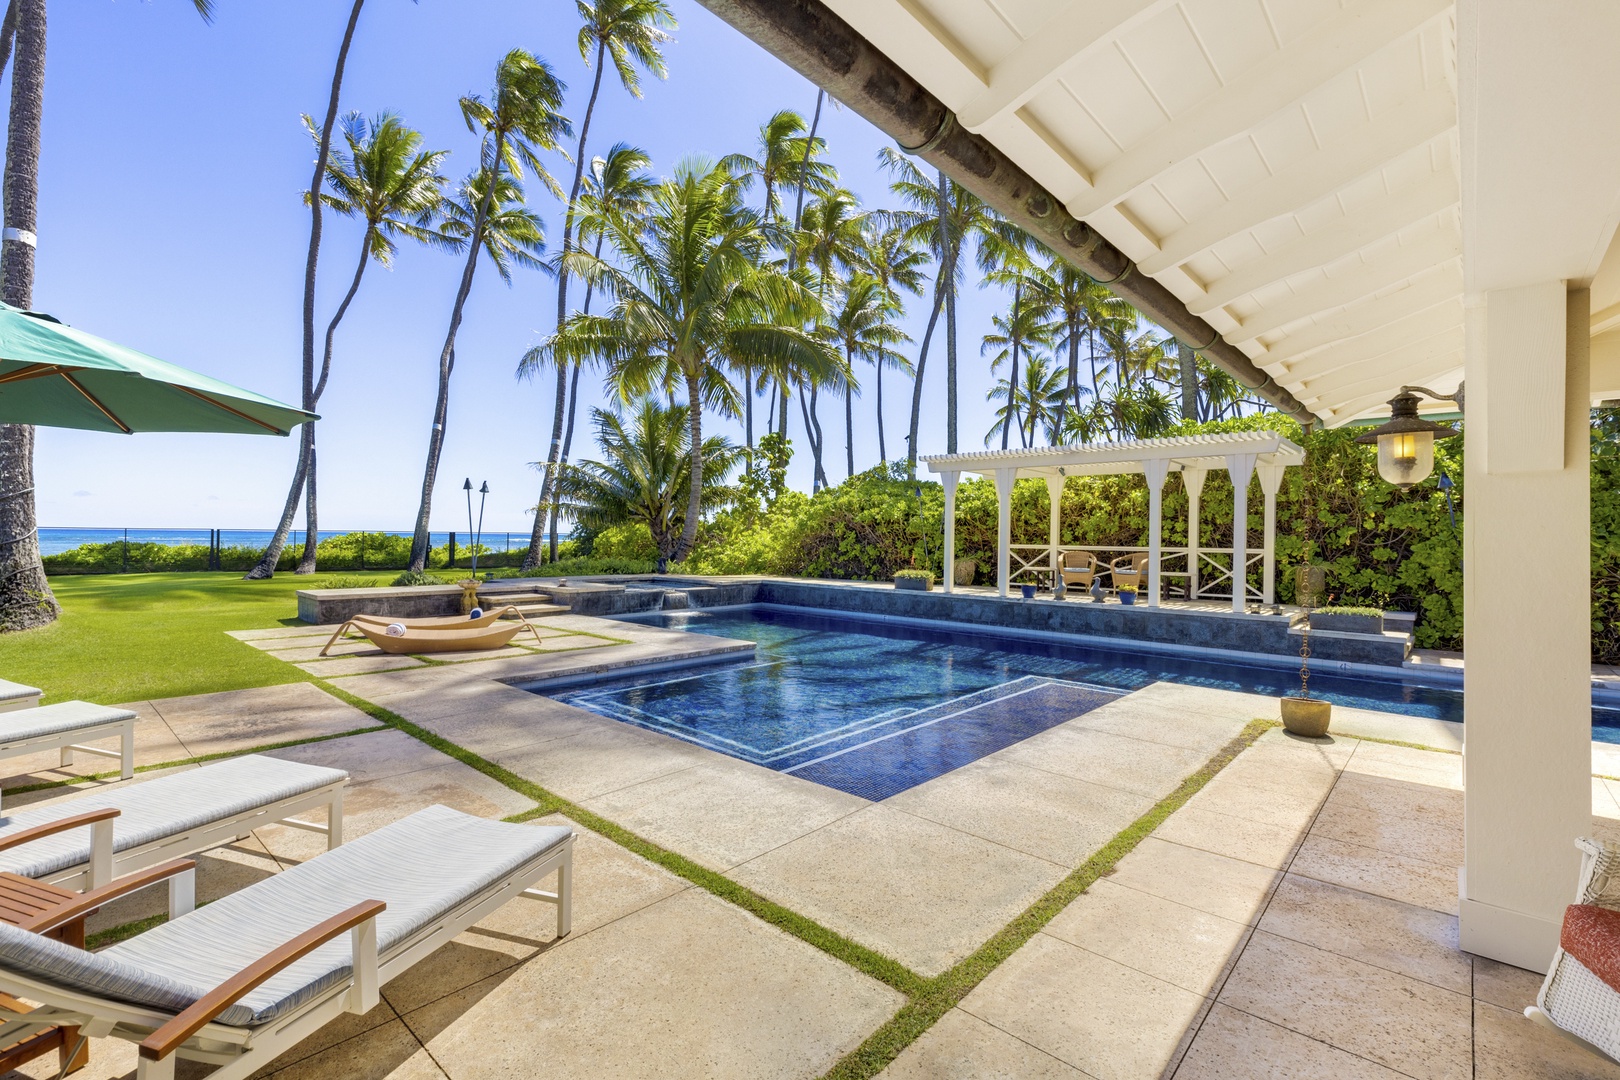 Honolulu Vacation Rentals, Kahala Beachside Estate - Enjoy palm trees swaying as you recline on the chaise lounges